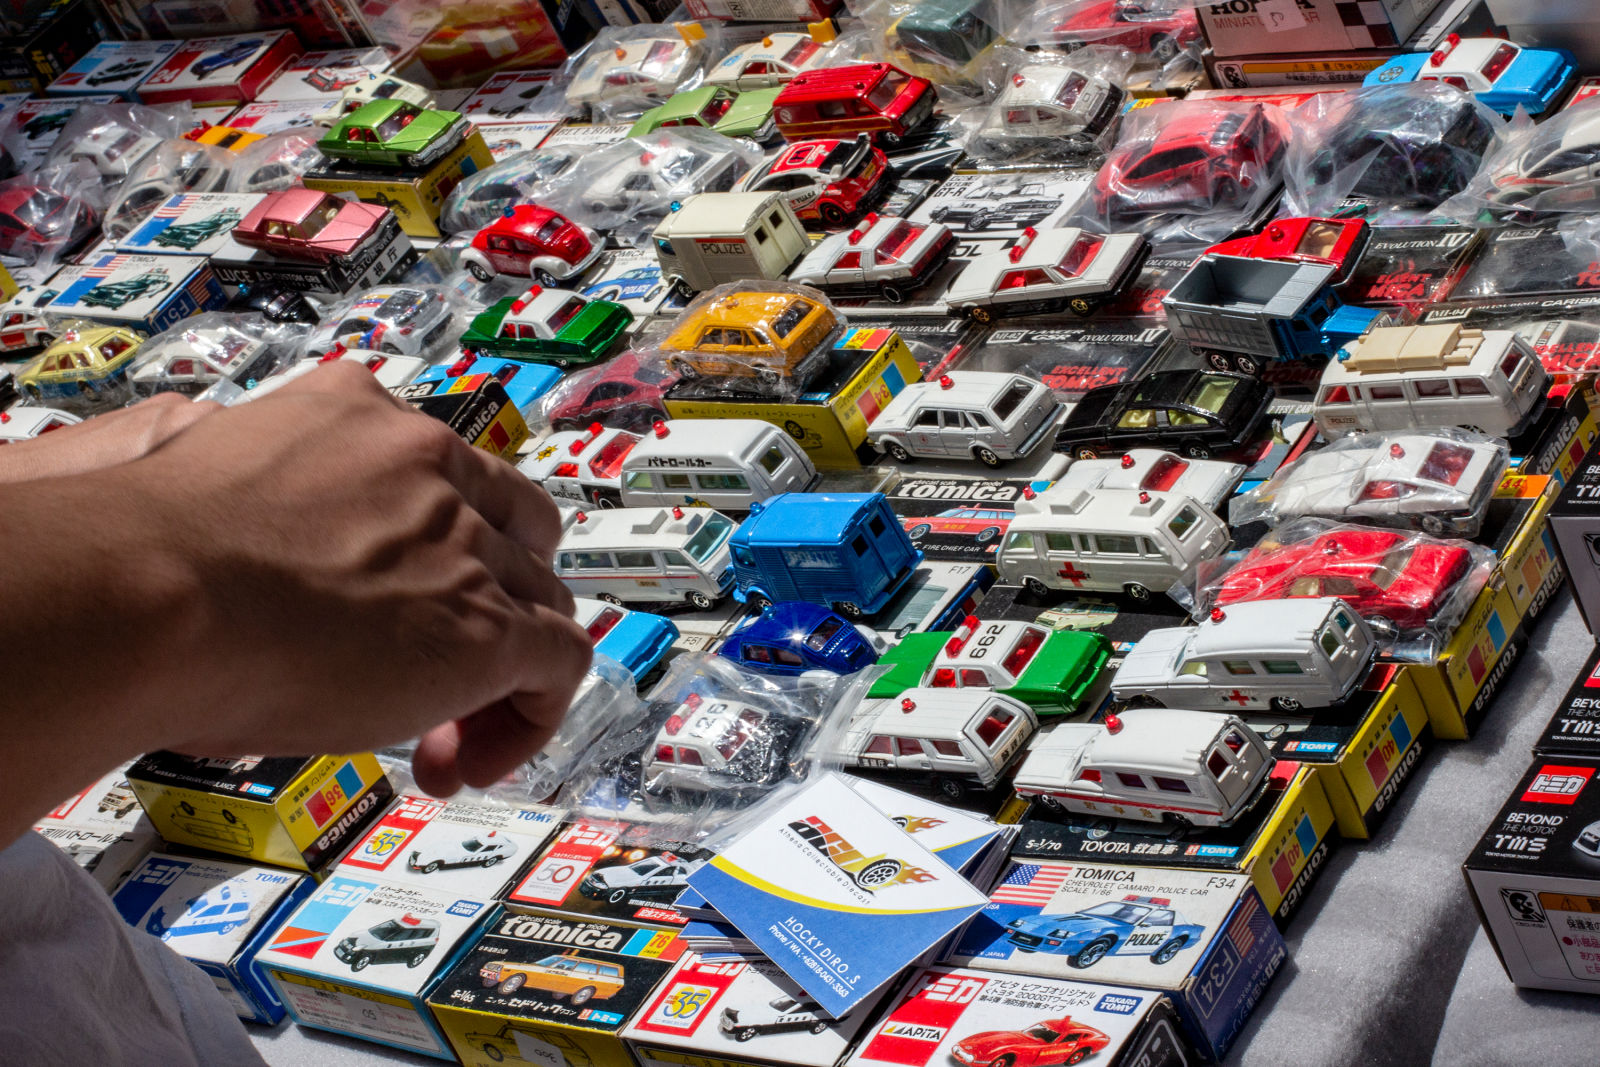 A private collector selling his vintage Tomica collection. He told me he has been in this hobby for even years. Mighty impressive. Fancy anything, Fintail?